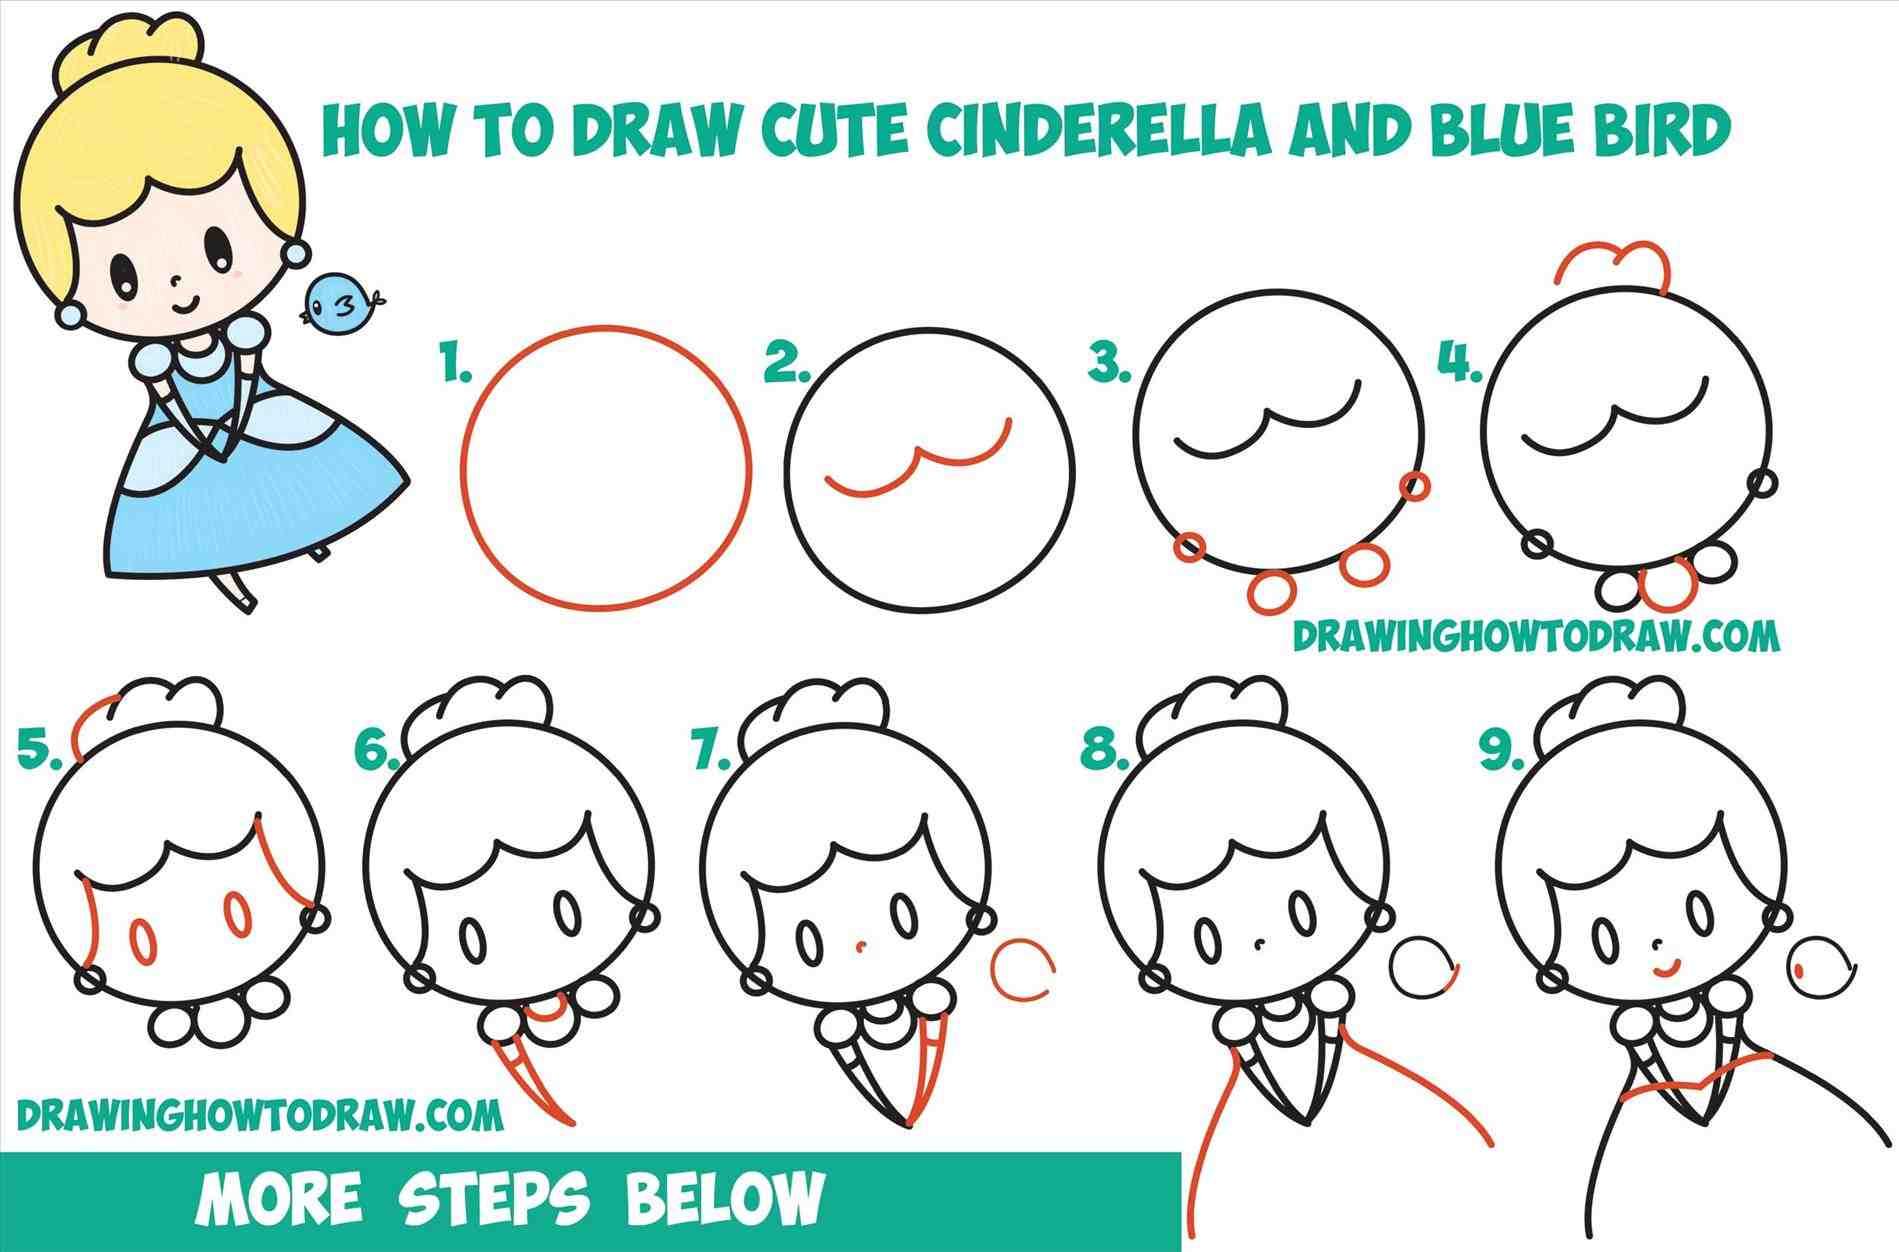 Step By Step How Drawing Disney Characters at